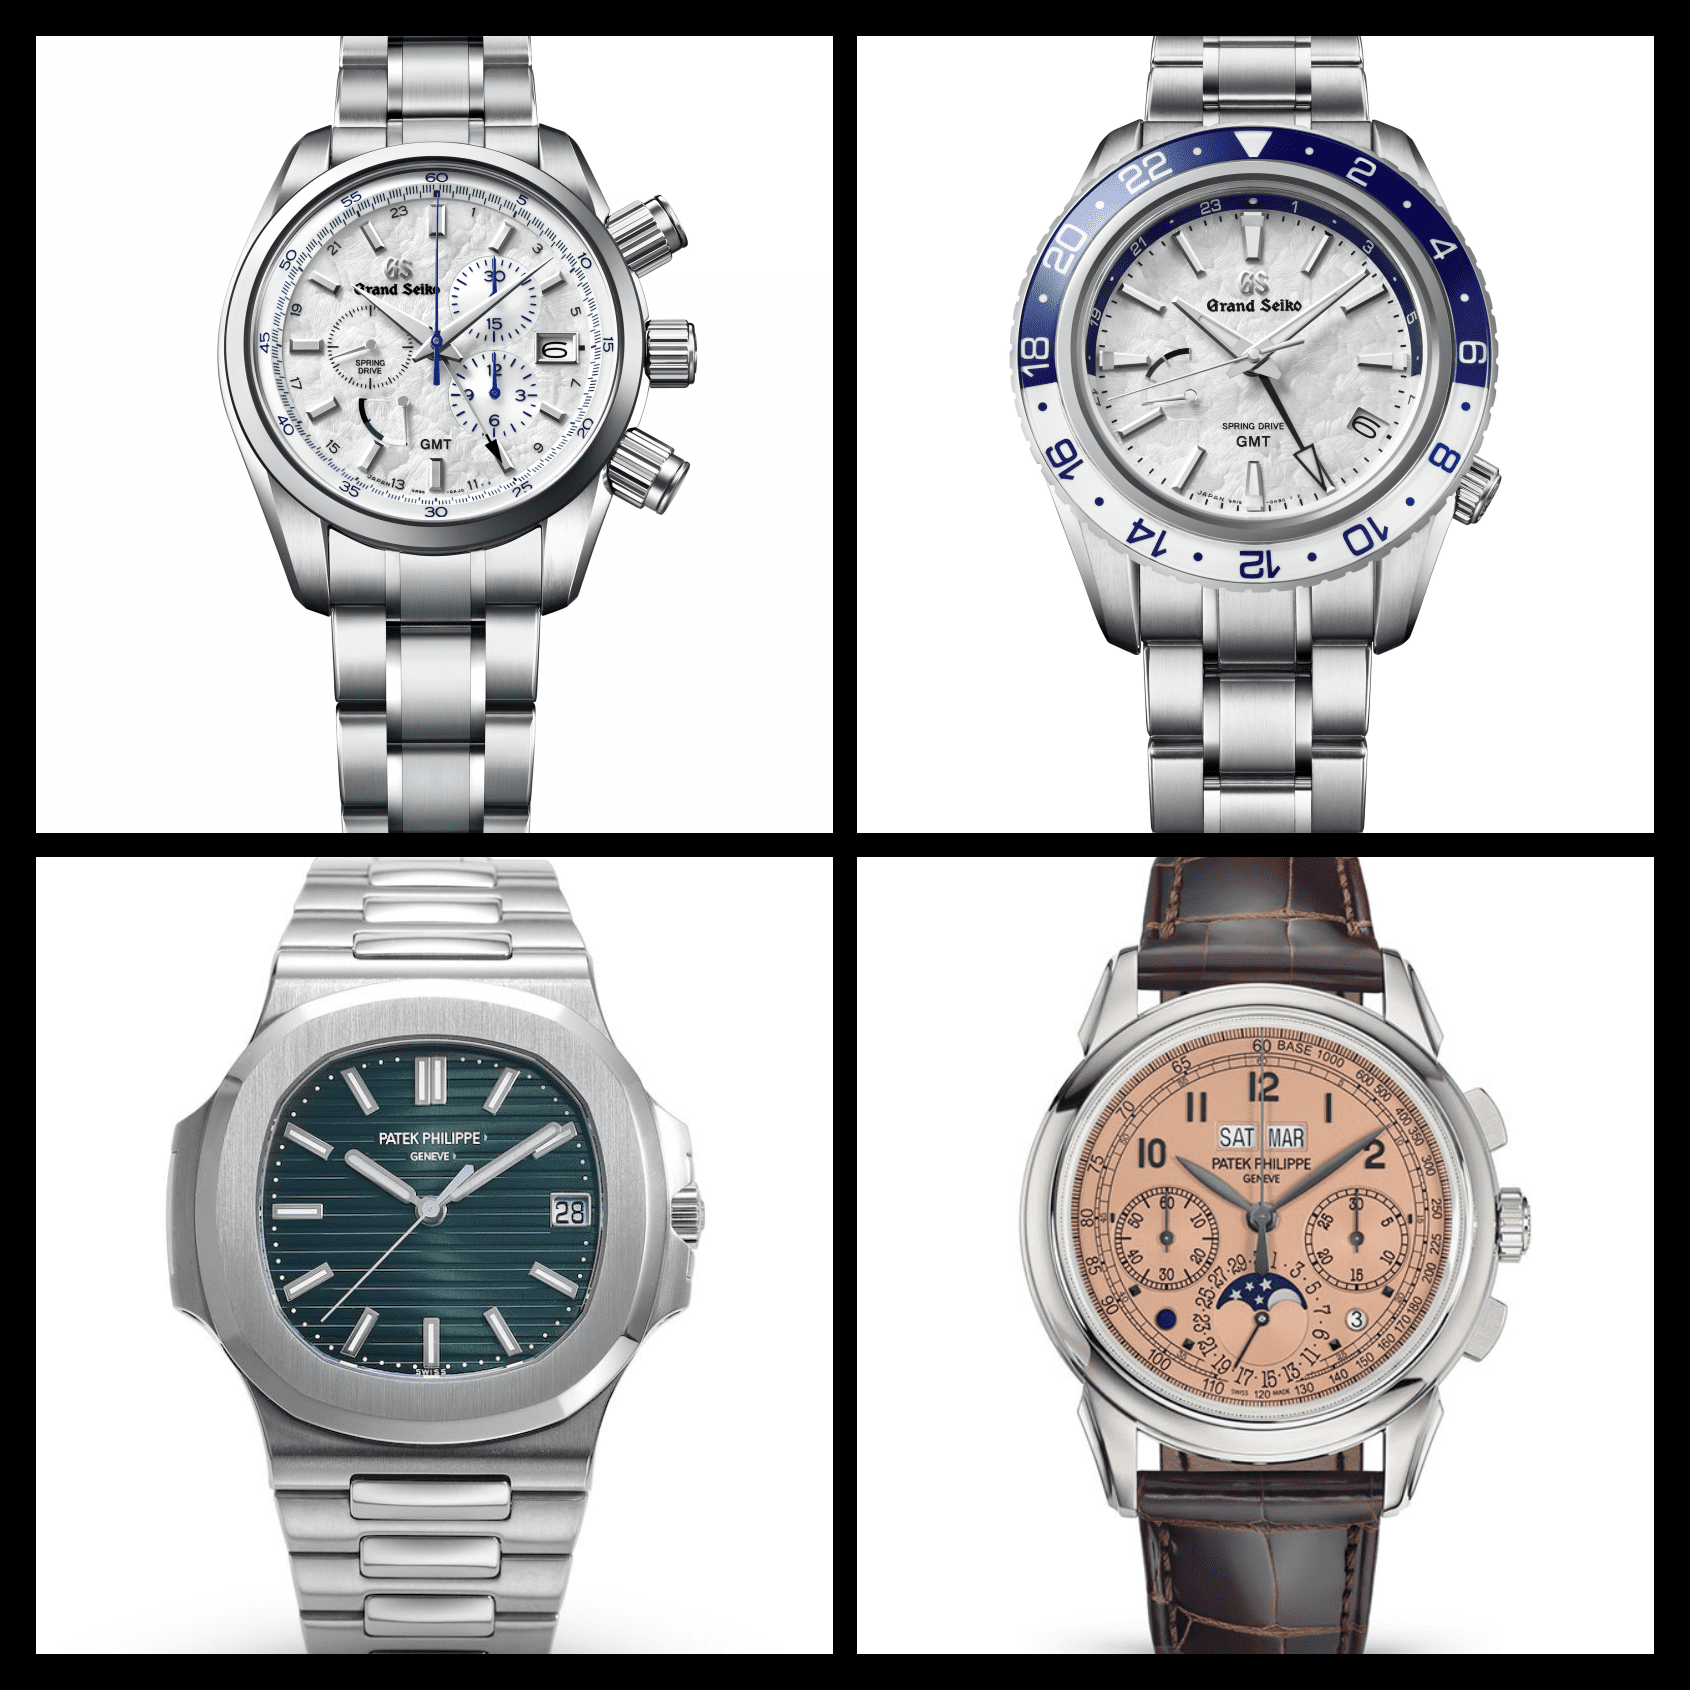 FRIDAY WIND DOWN: Grand Seiko continues to expand their catalogue while Patek Philippe clears theirs out